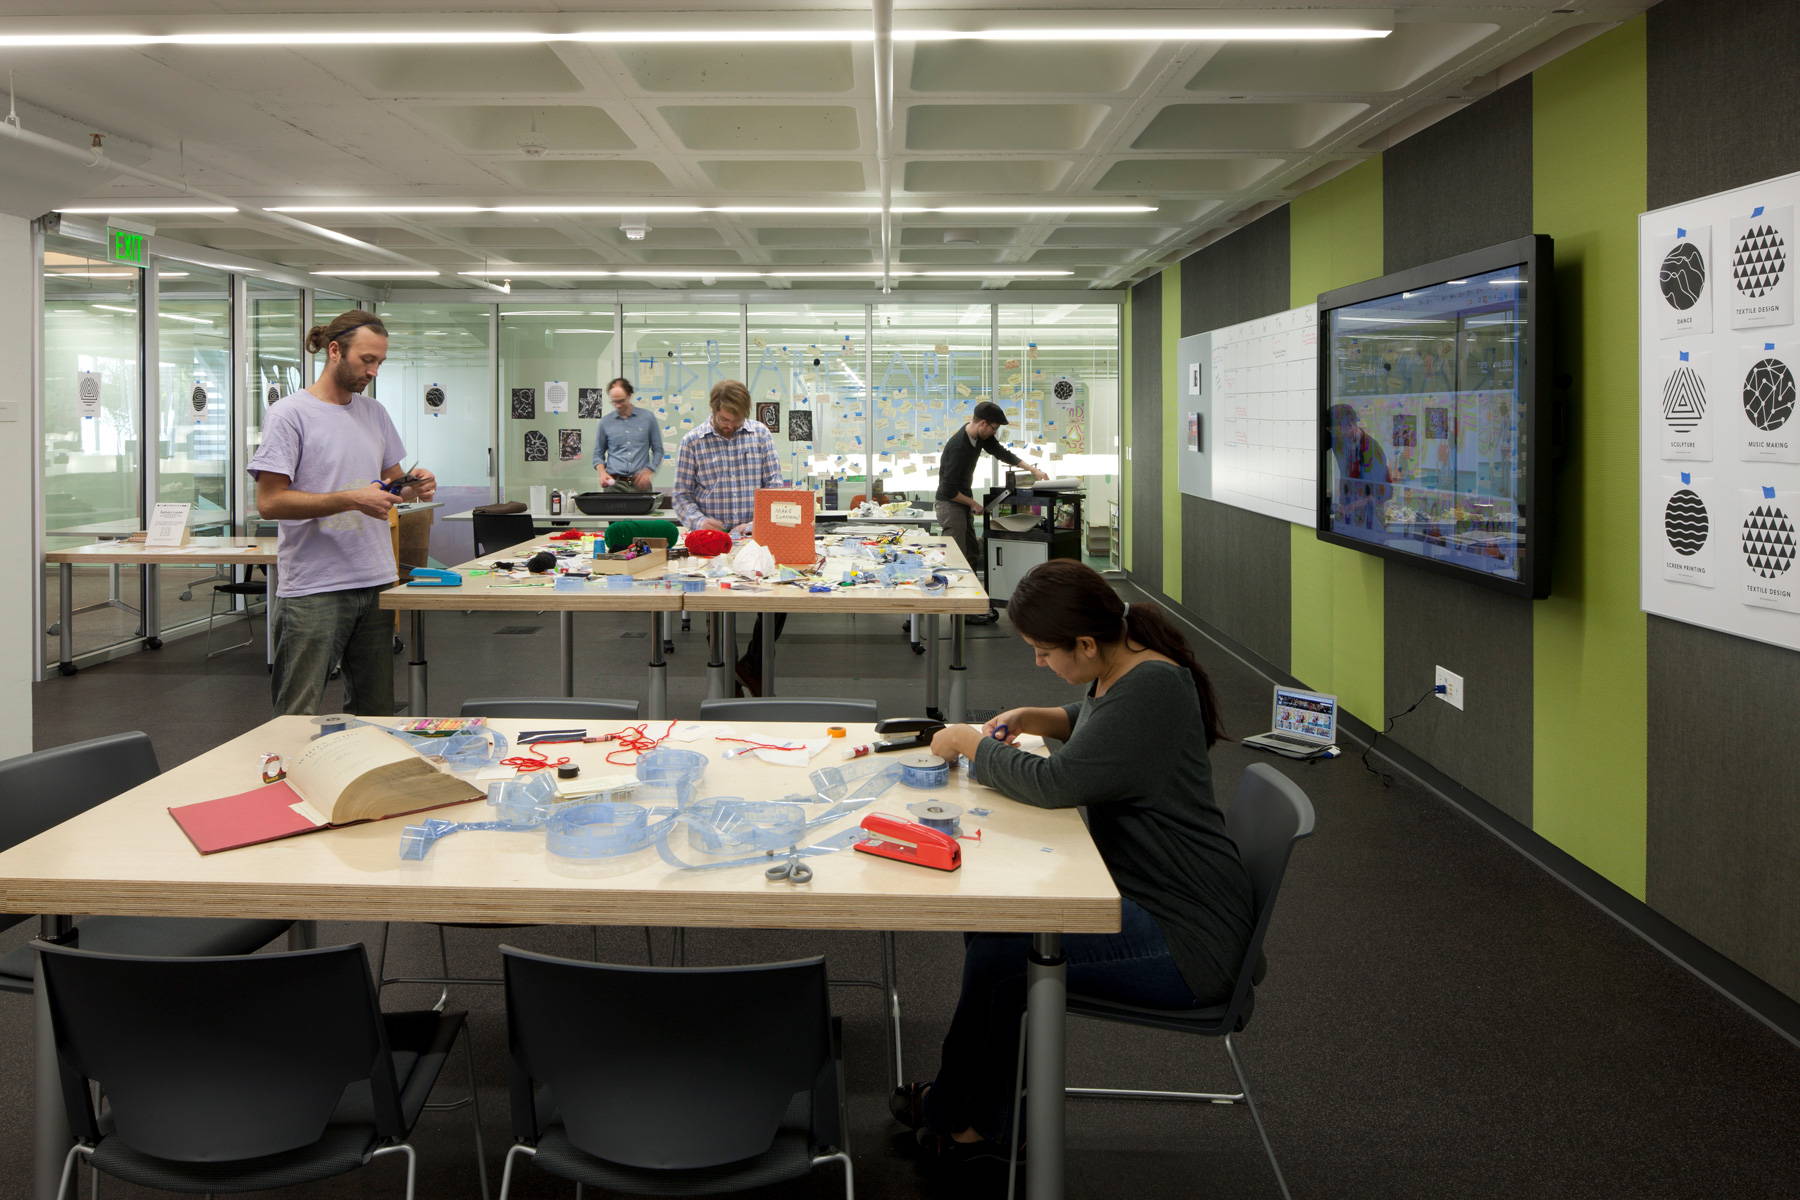 Key Features of Collaborative Spaces